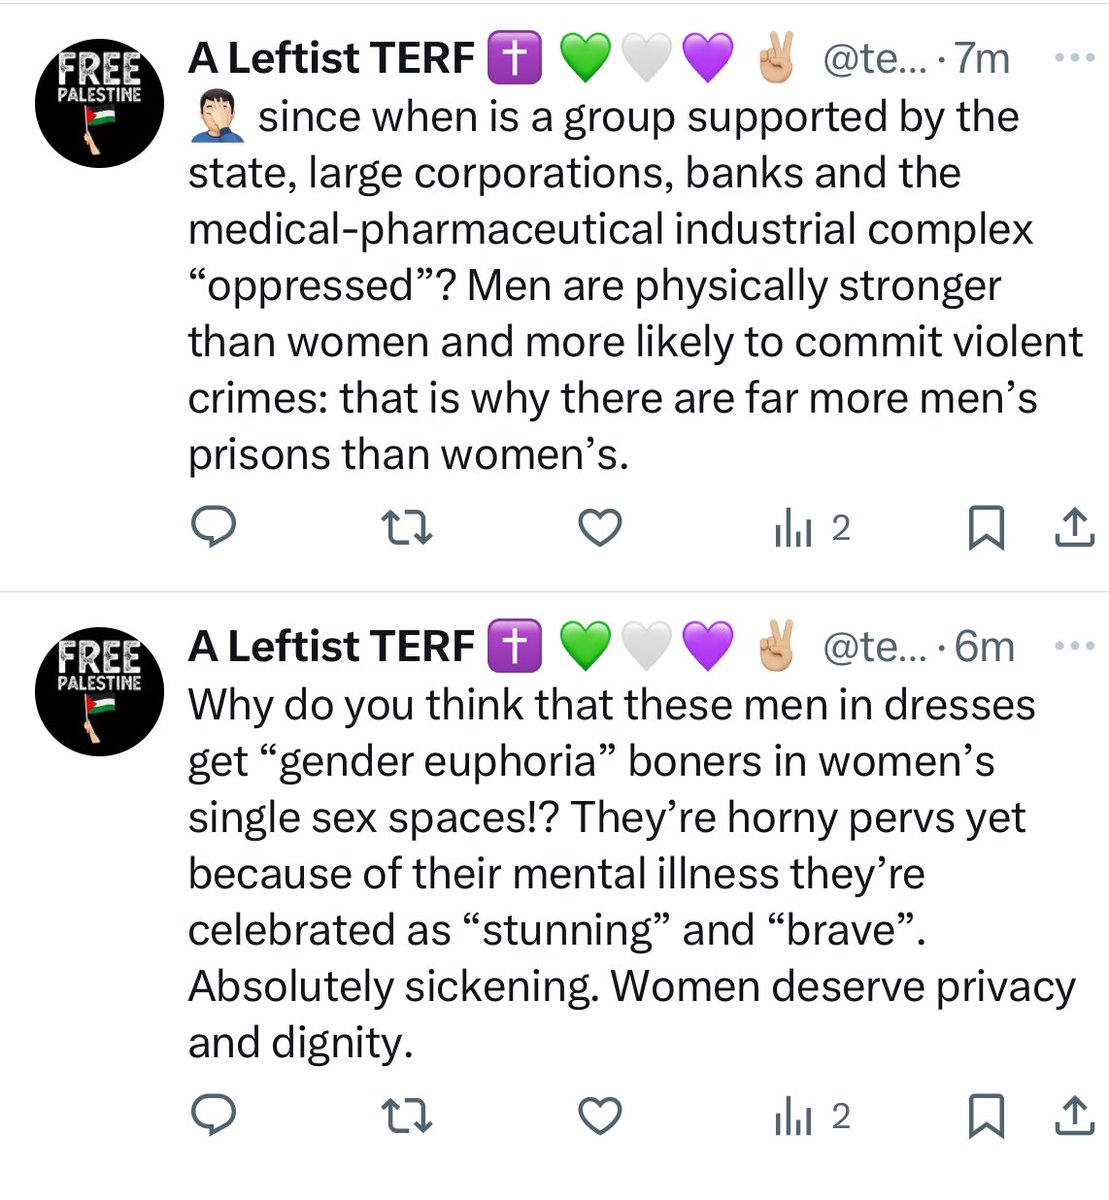 You can’t be a TERF and leftist btw.